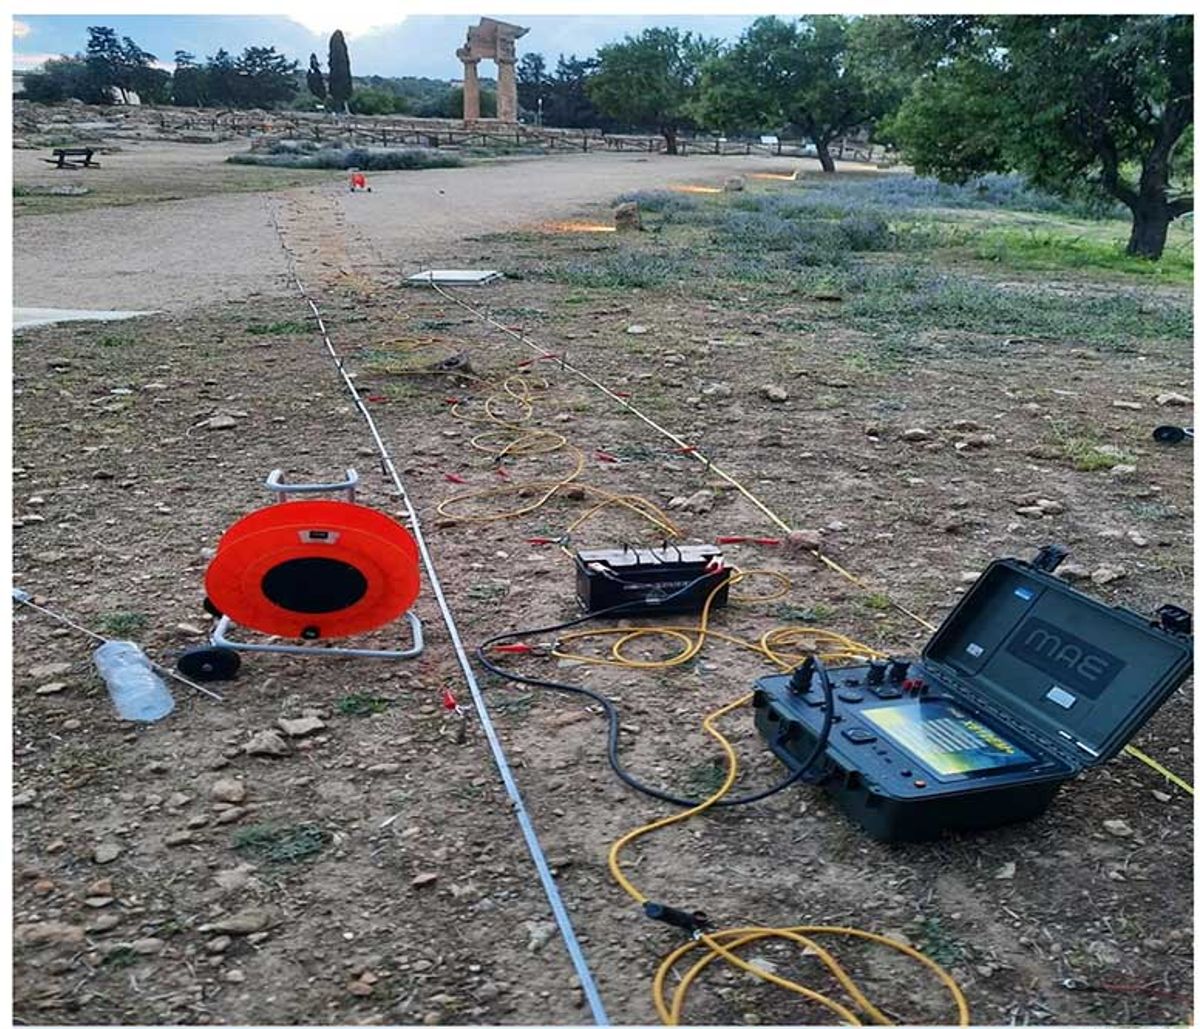 Archaeologists used geophysical survey techniques to find a previously unknown structure underground

Sebastiano Imposa


